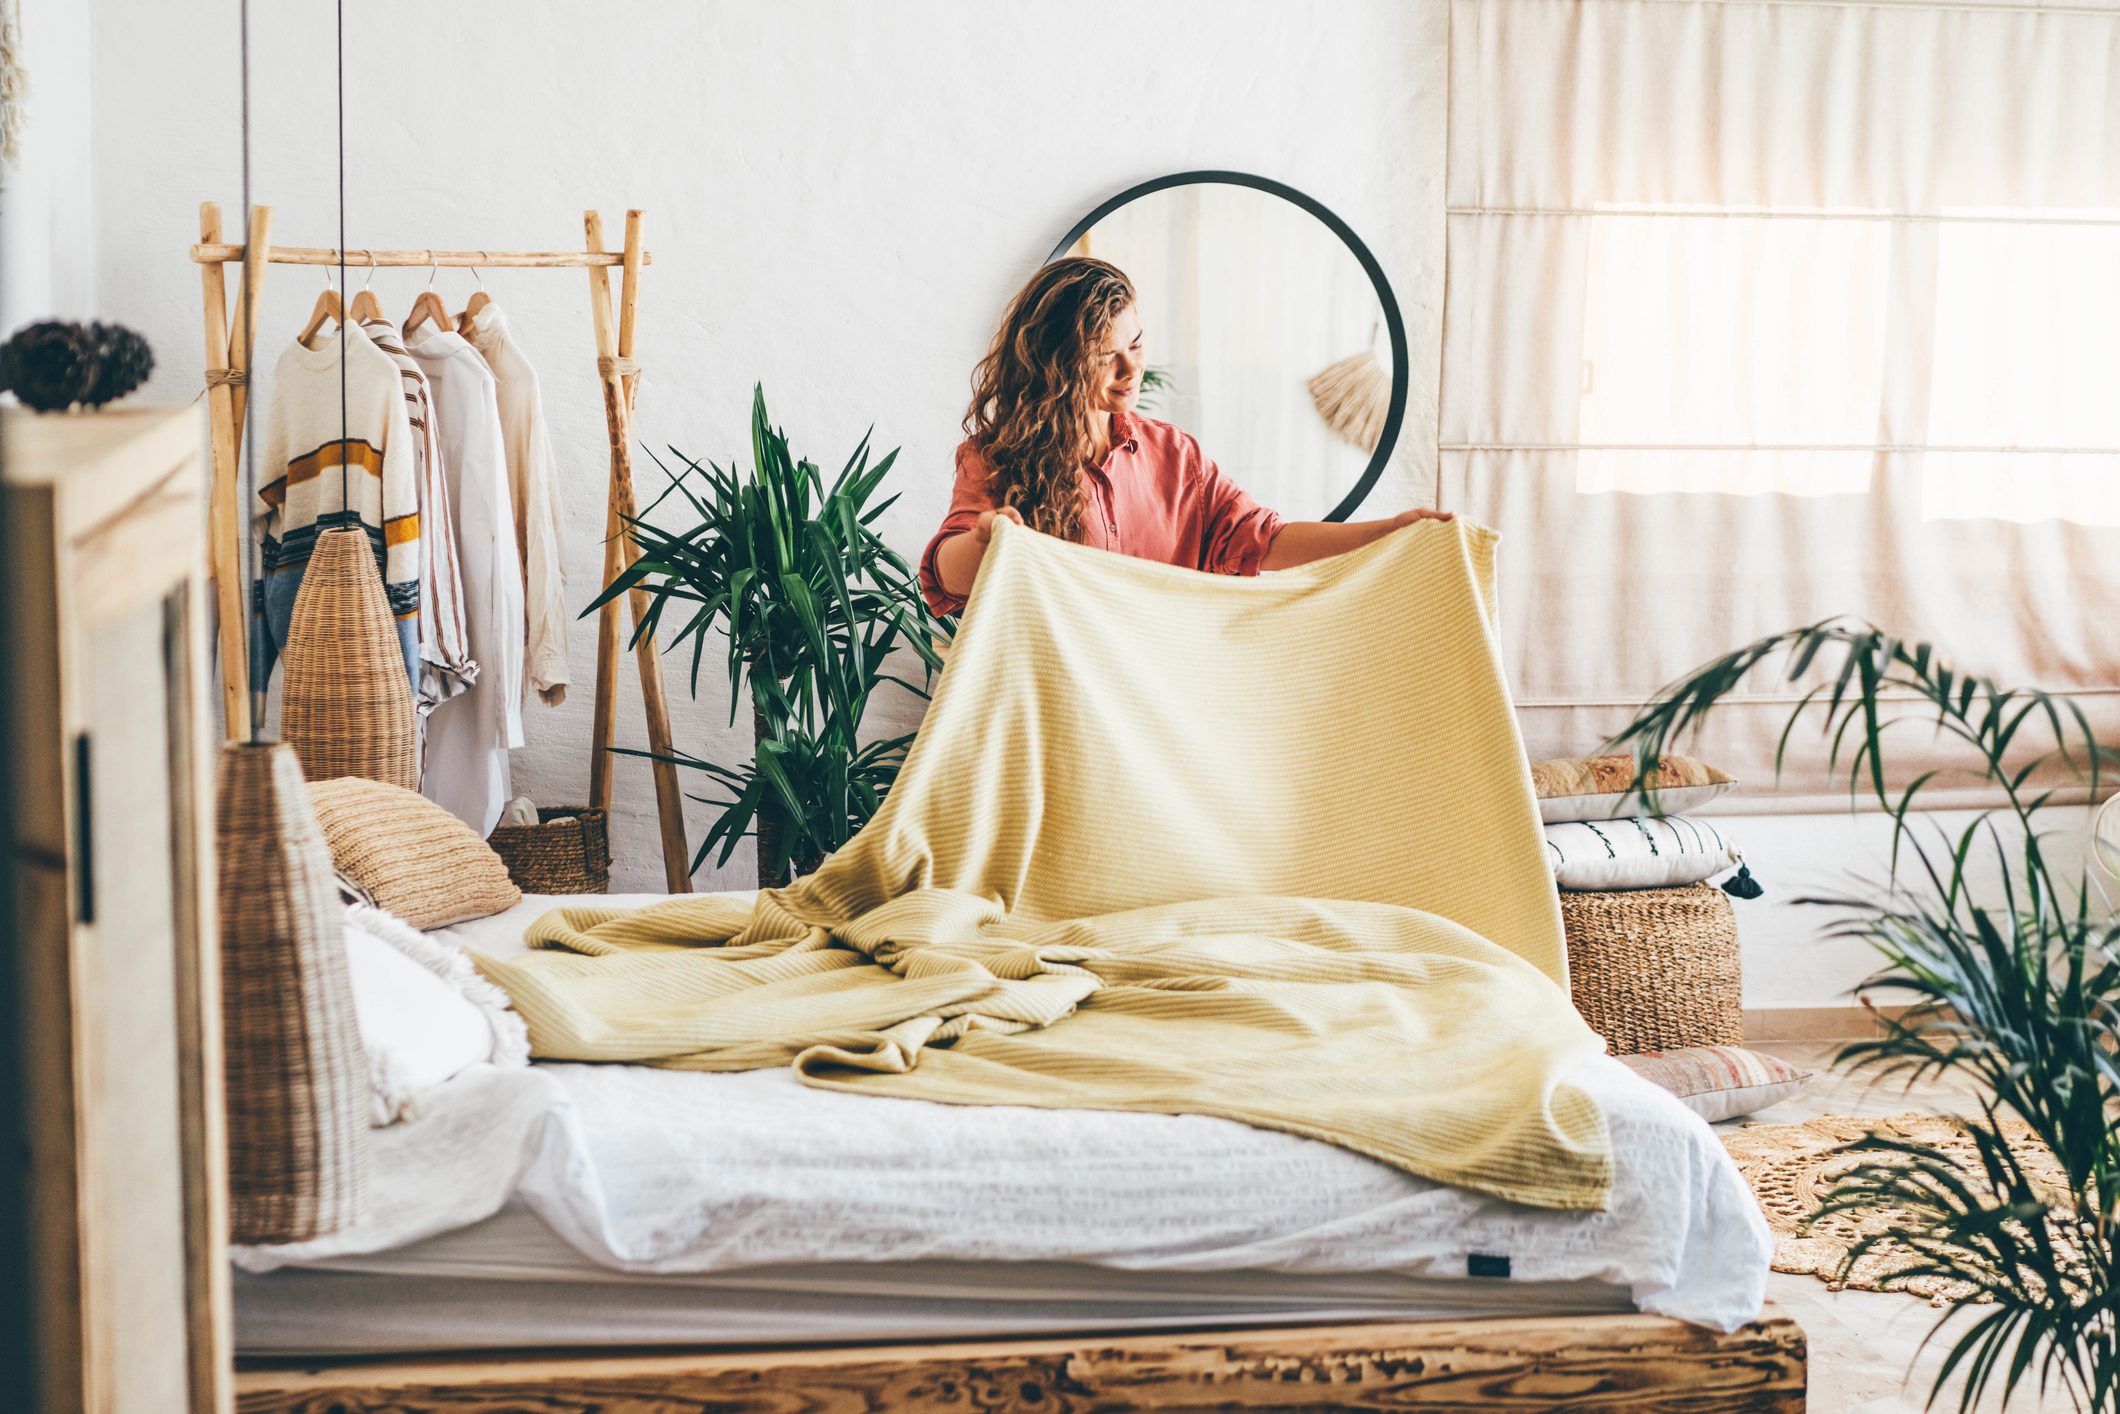 Woman doing her morning routine, arranging pillows and making up bed at home.